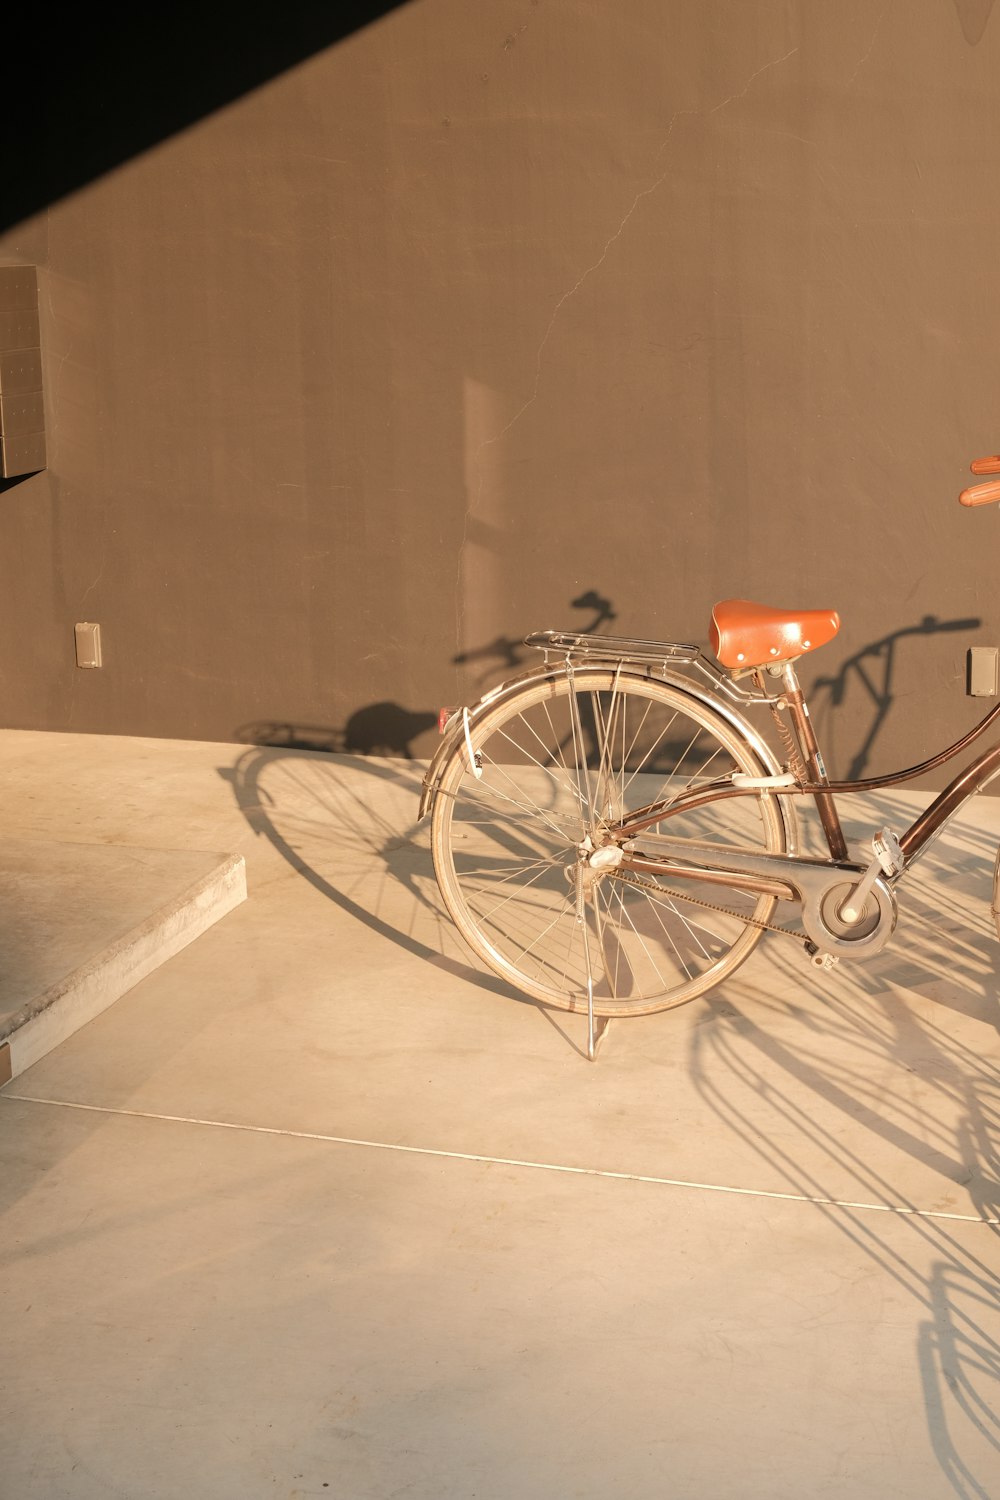 a bicycle is parked on a cement surface